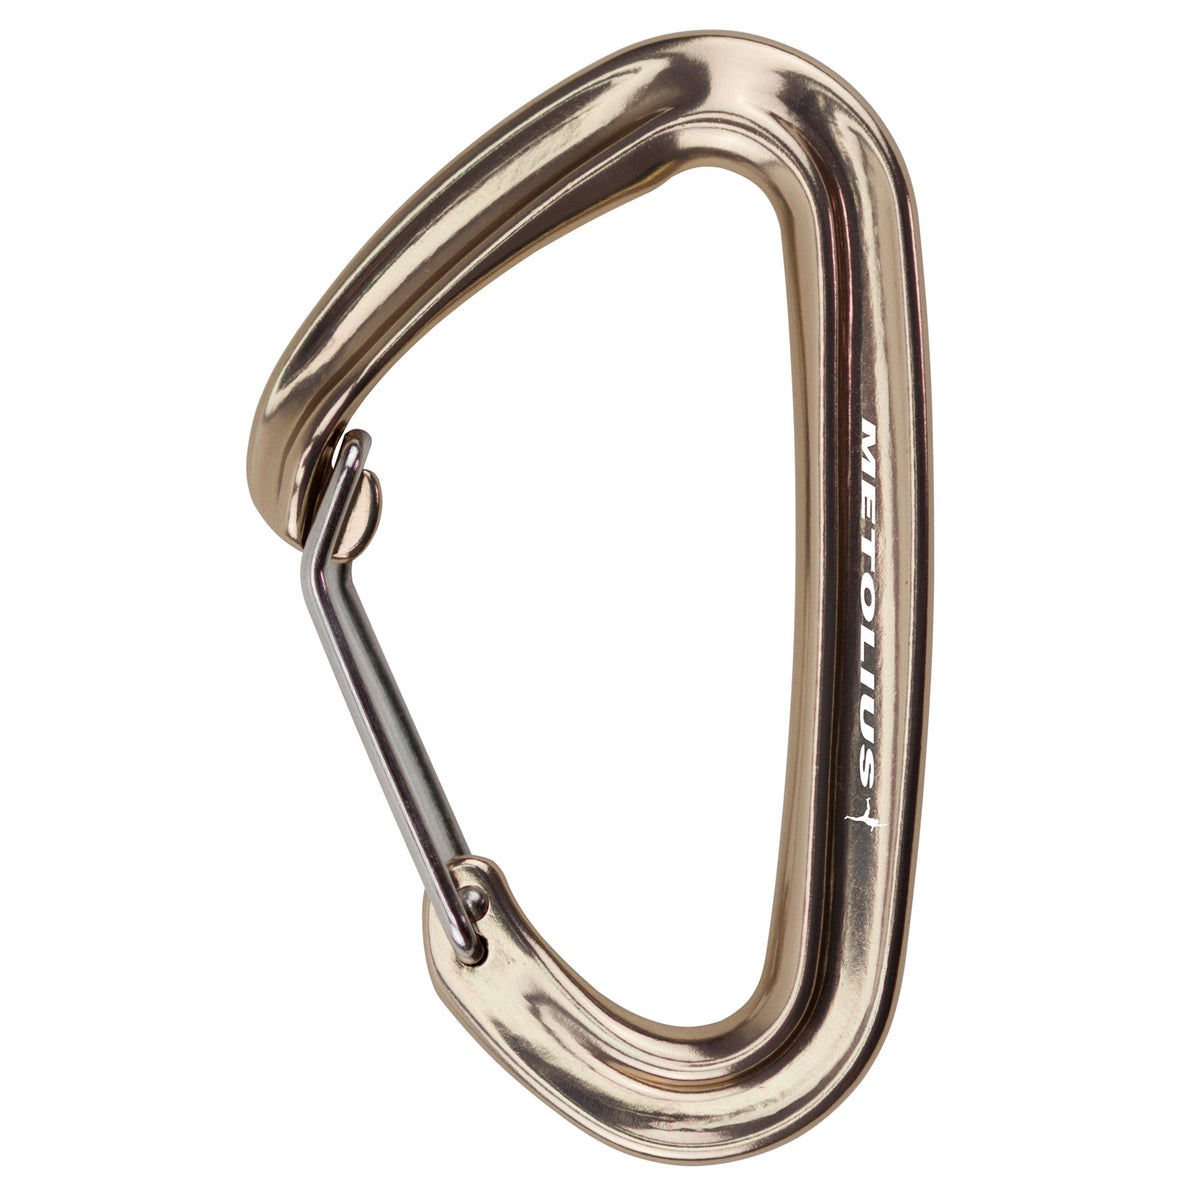 a photo of the metolius inferno carabiner in bronze